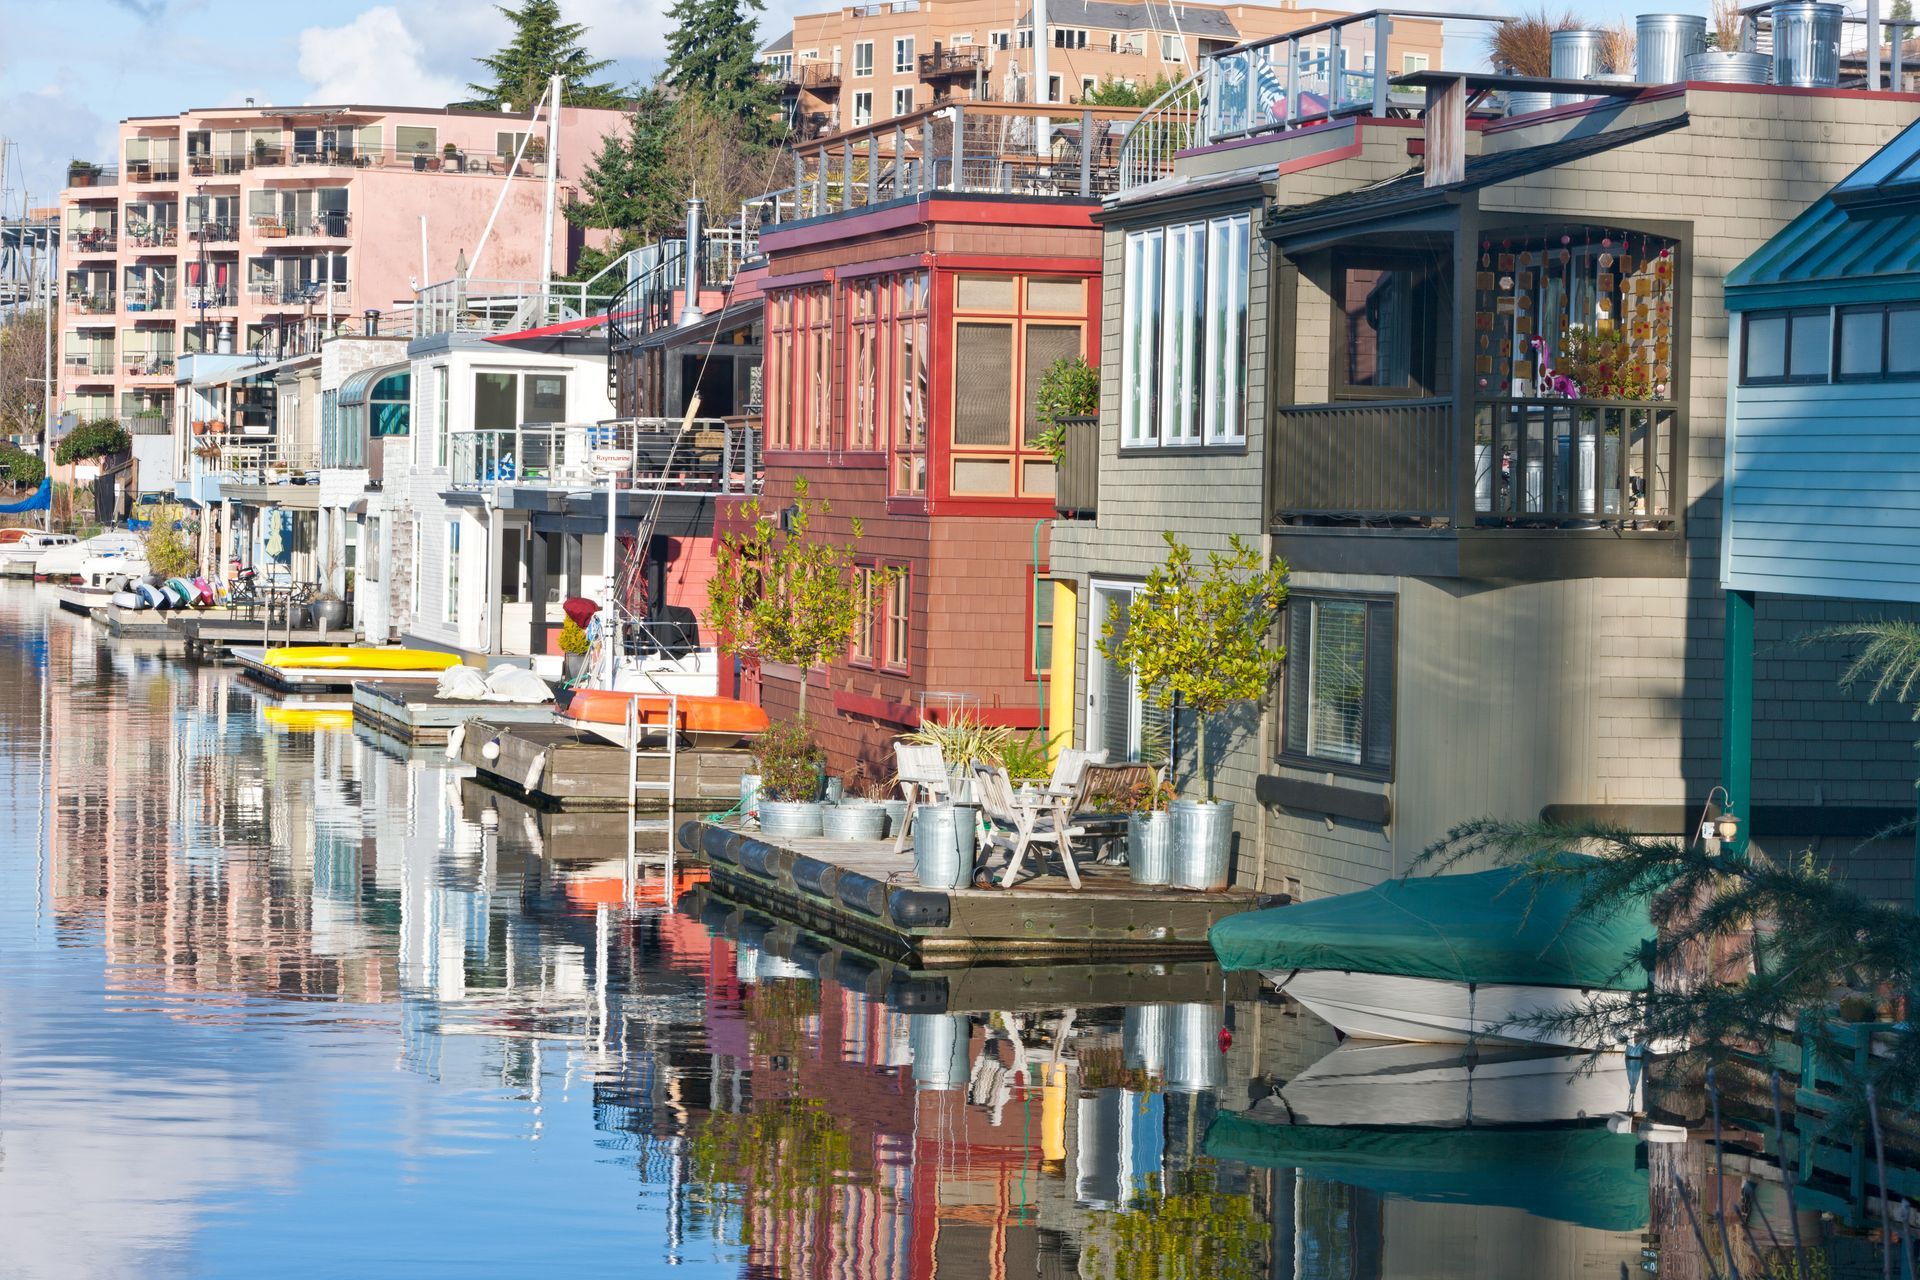 A row of houses sitting on top of a body of water.